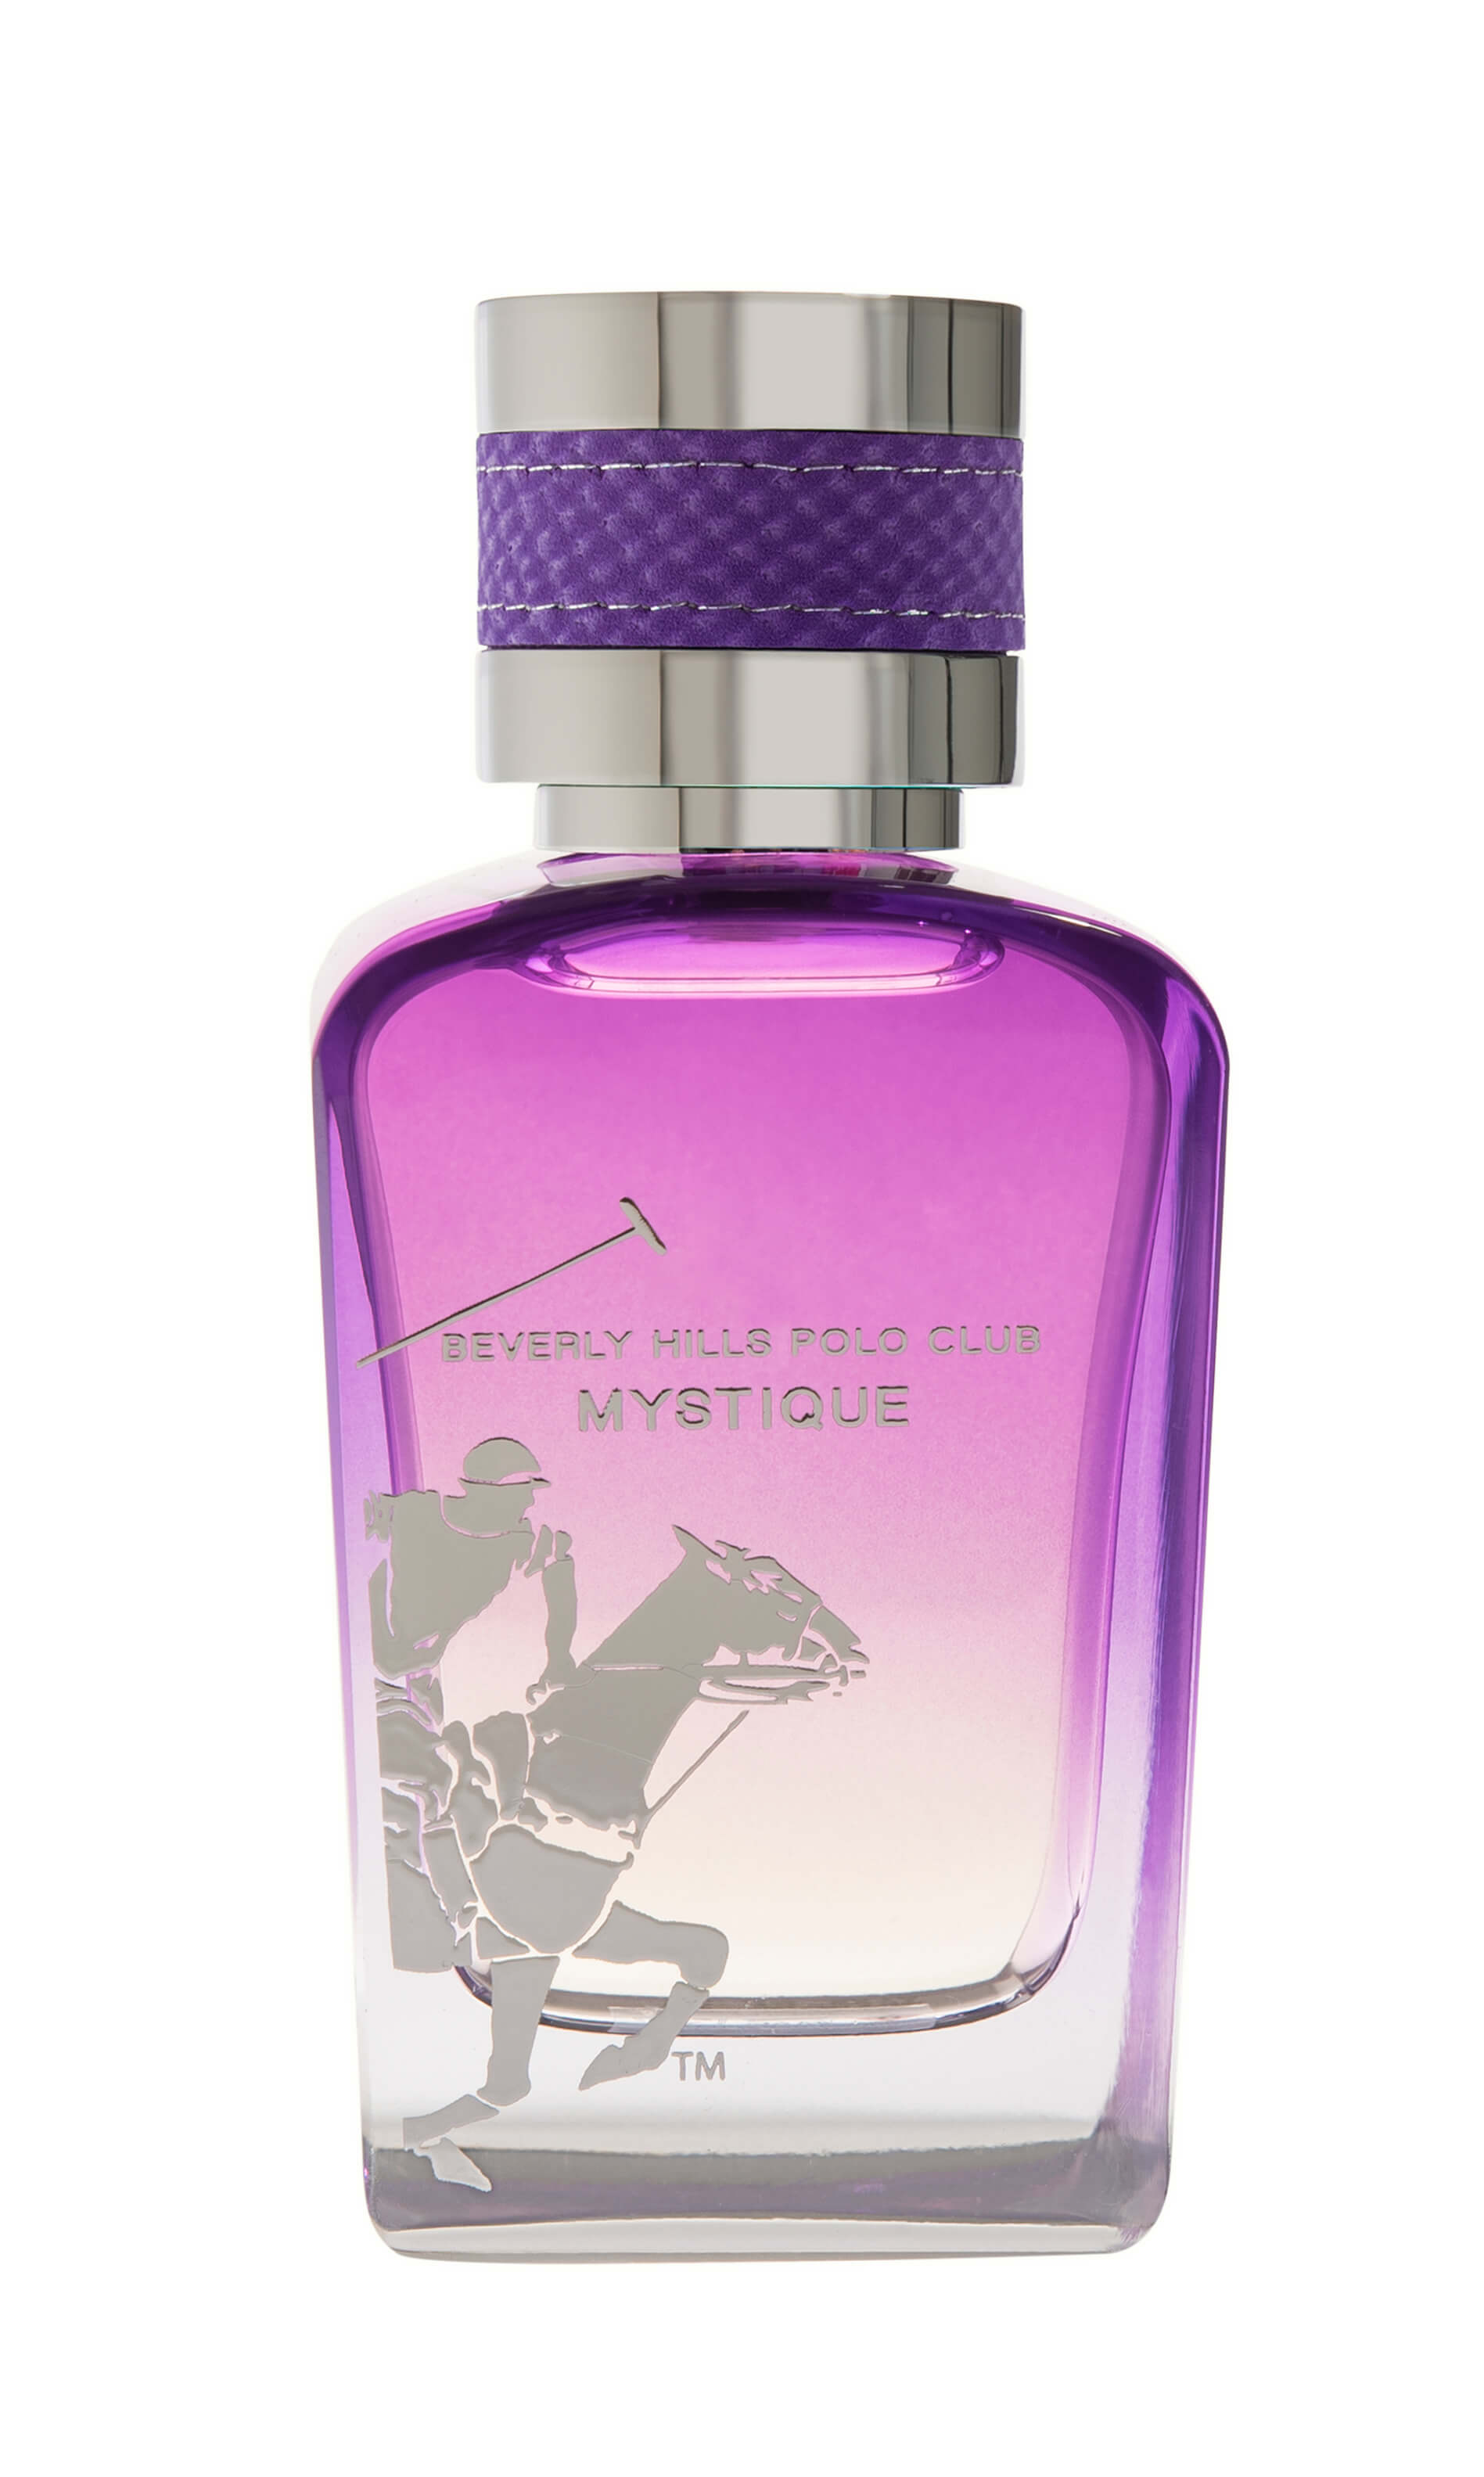 Beverly Hills Polo Club EDP For Women Mystique 100ml